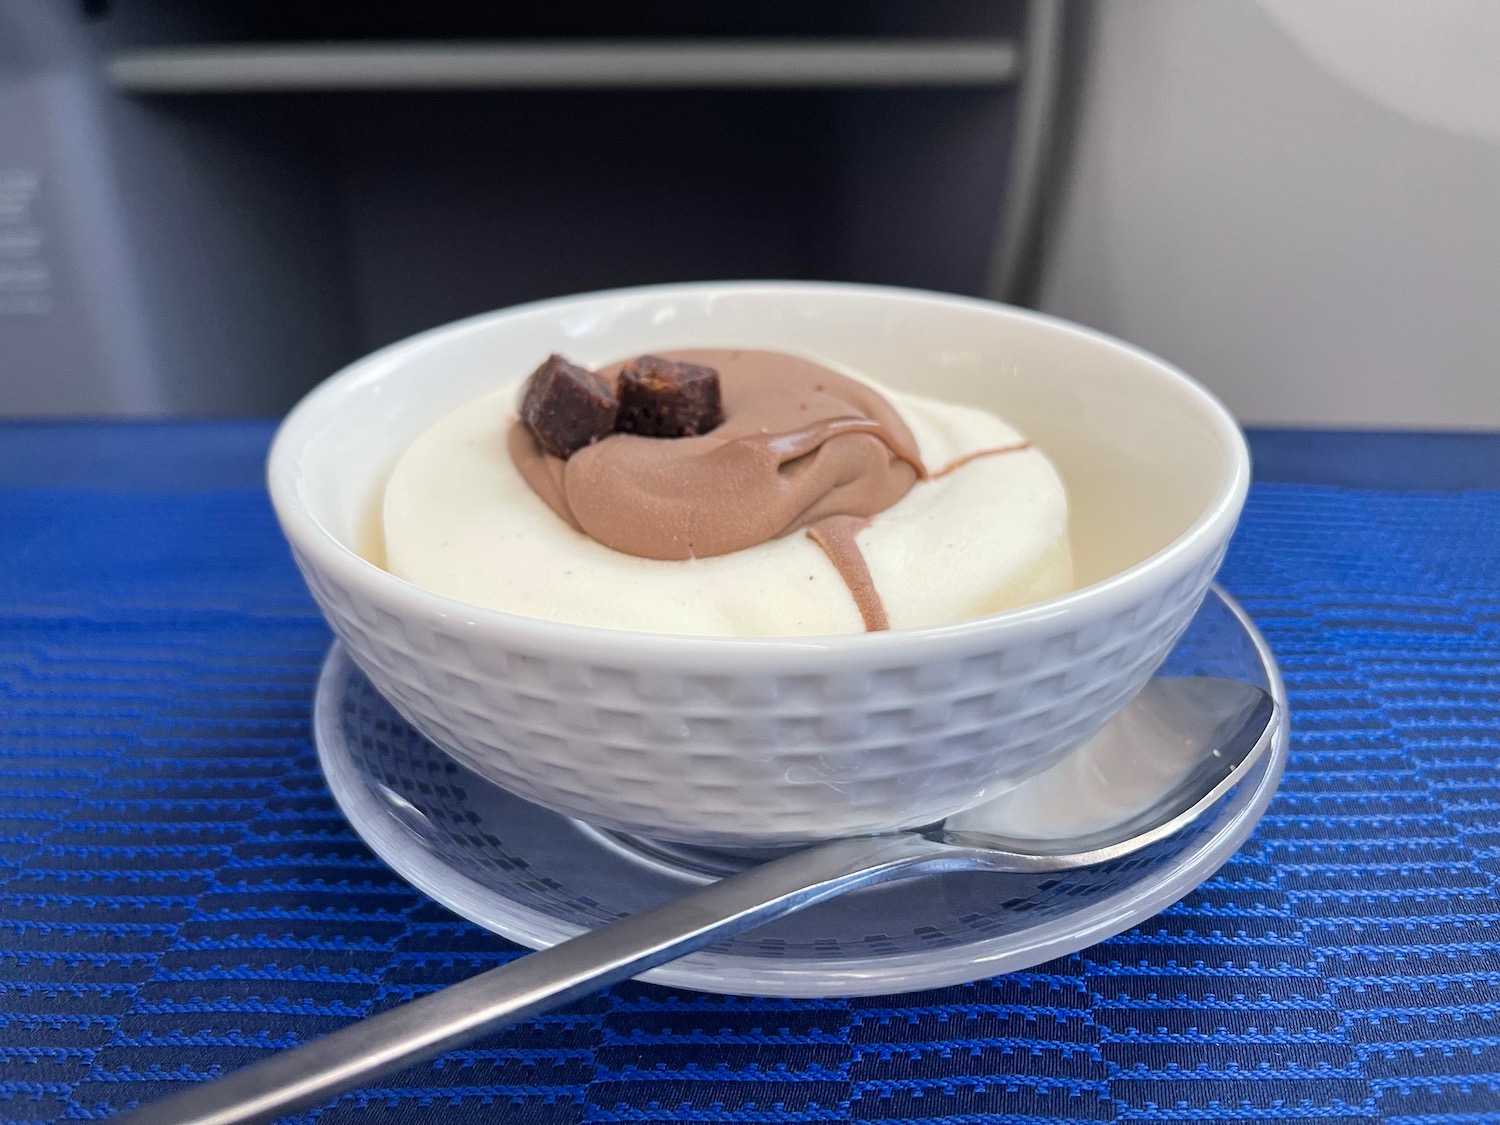 a bowl of ice cream with chocolate and brown topping